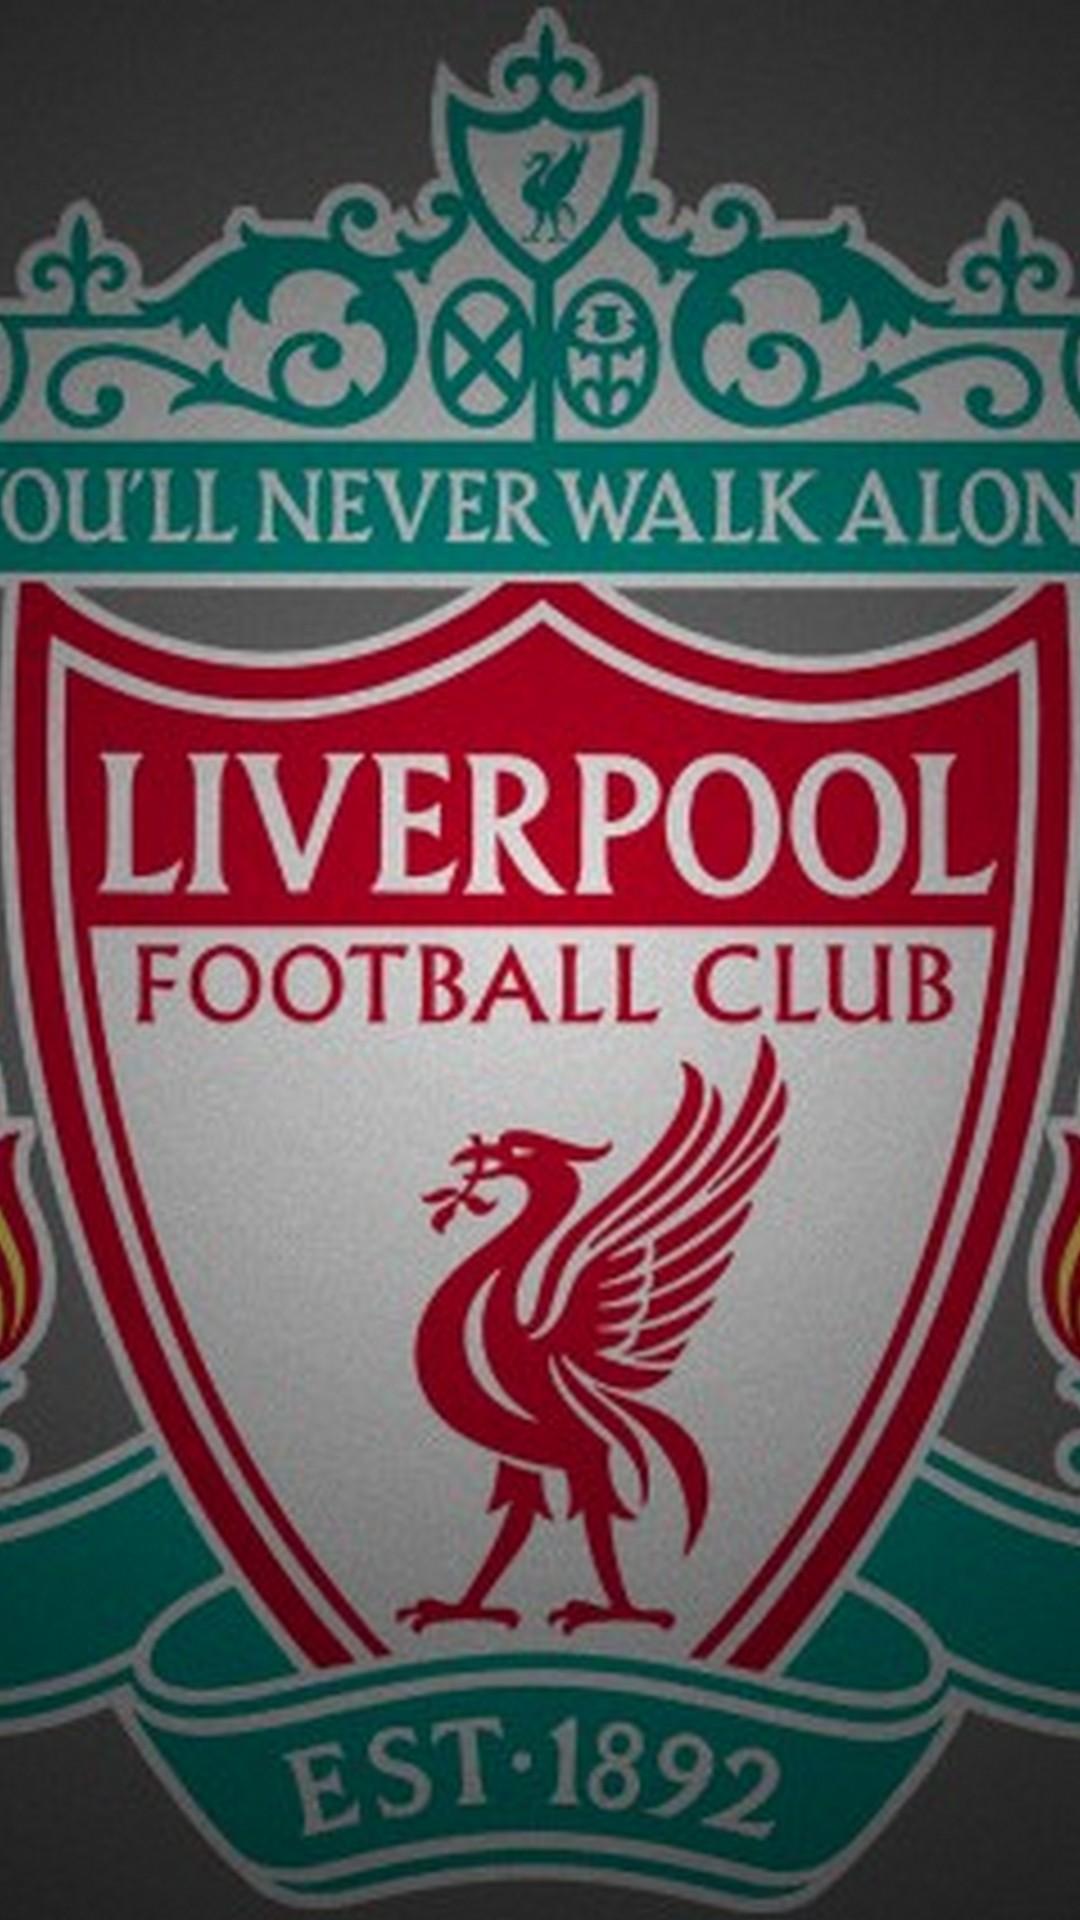 Wallpaper Phone Liverpool Android Wallpaper